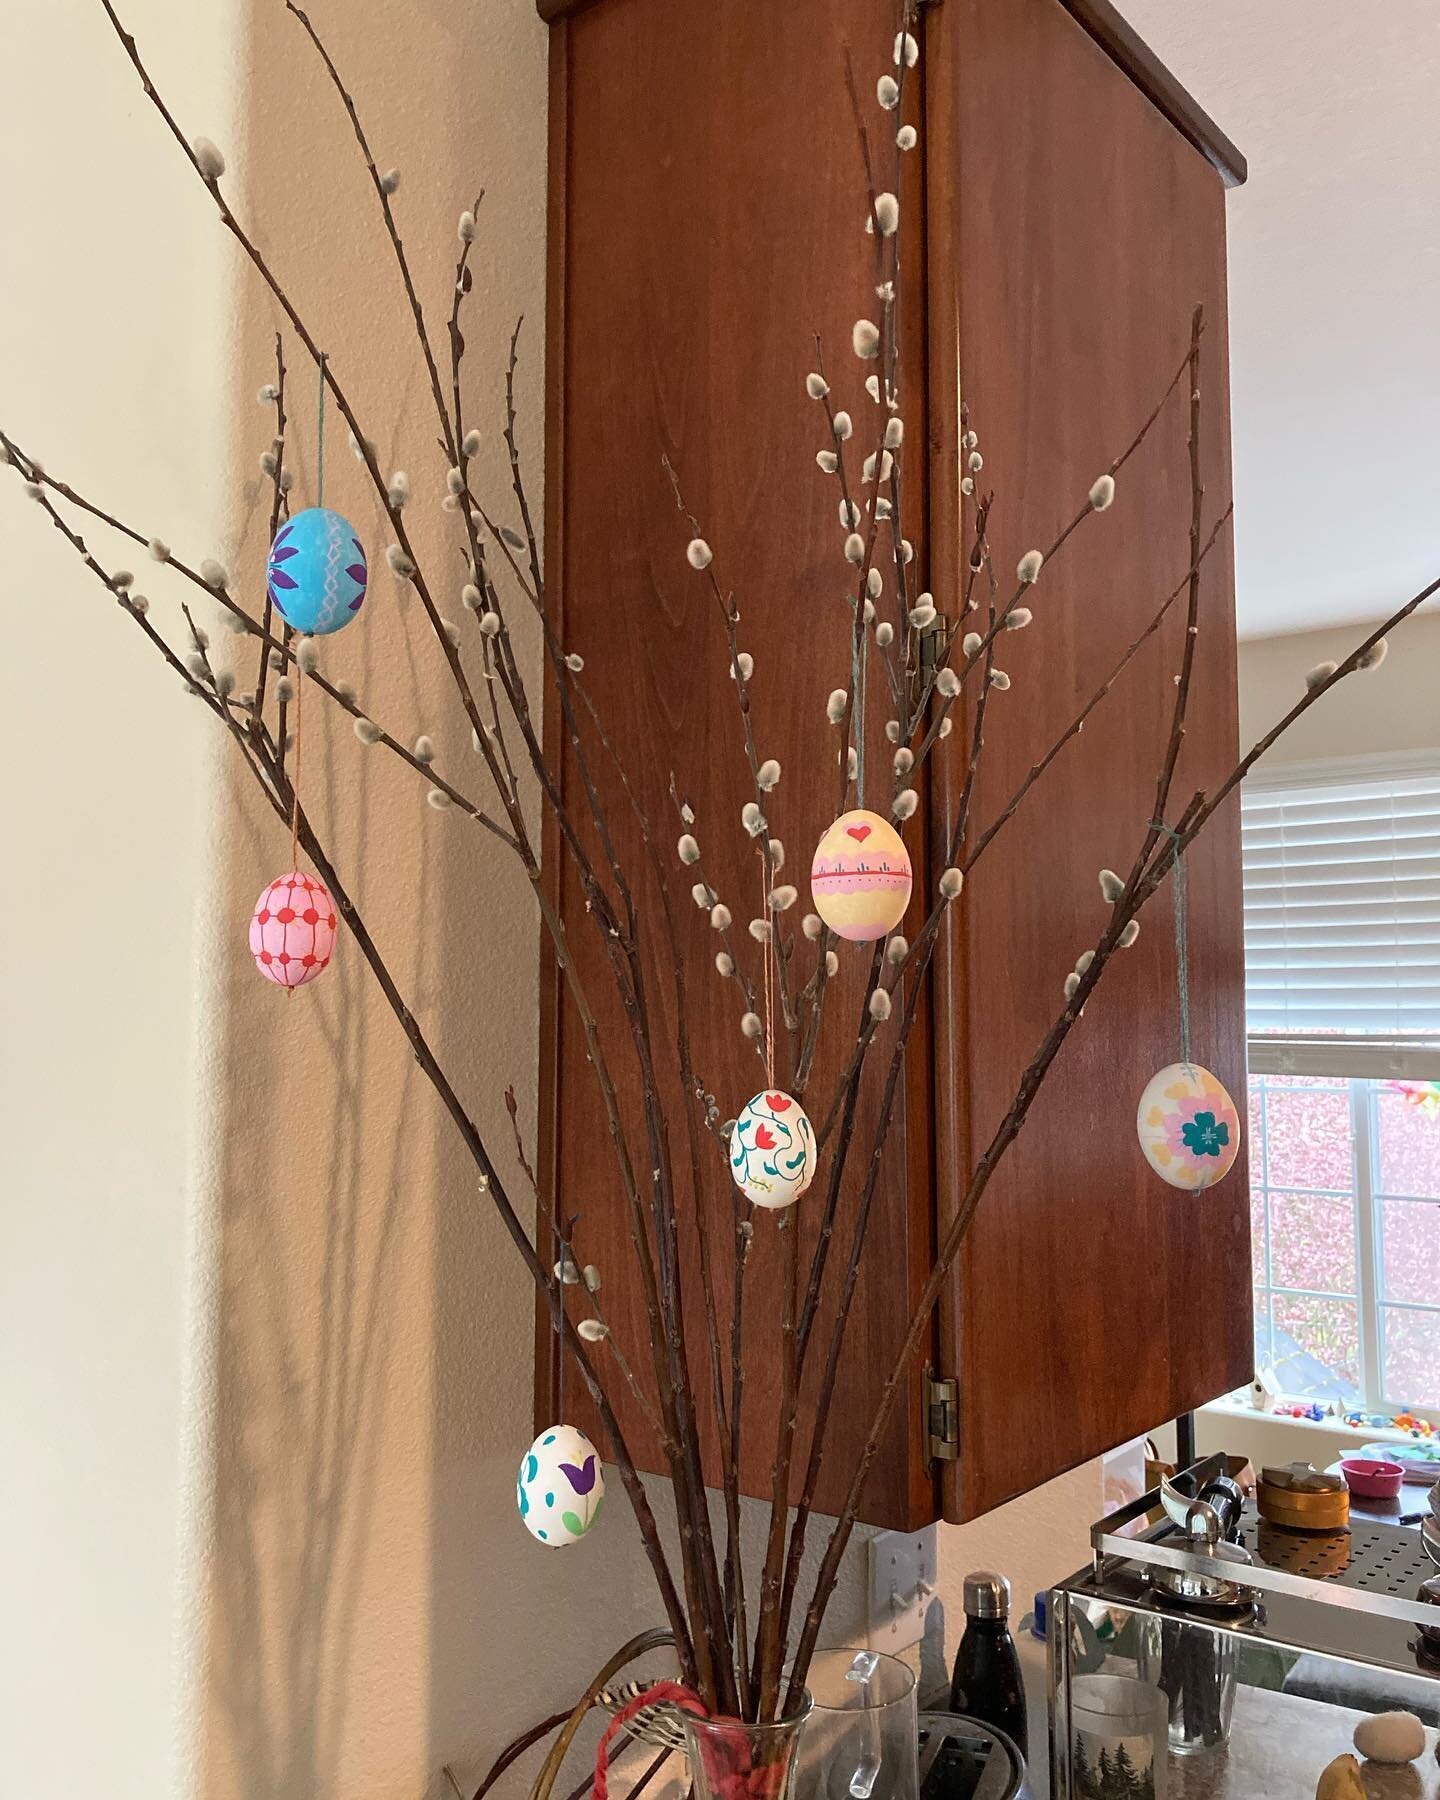 Very happy with my Easter tree! This is the first year I blew out eggs and decorated them and it was sooo fun. I used posca paint markers to draw on them and will definitely do more, maybe even this year! The kids loved it too.

Maybe next year I&rsq